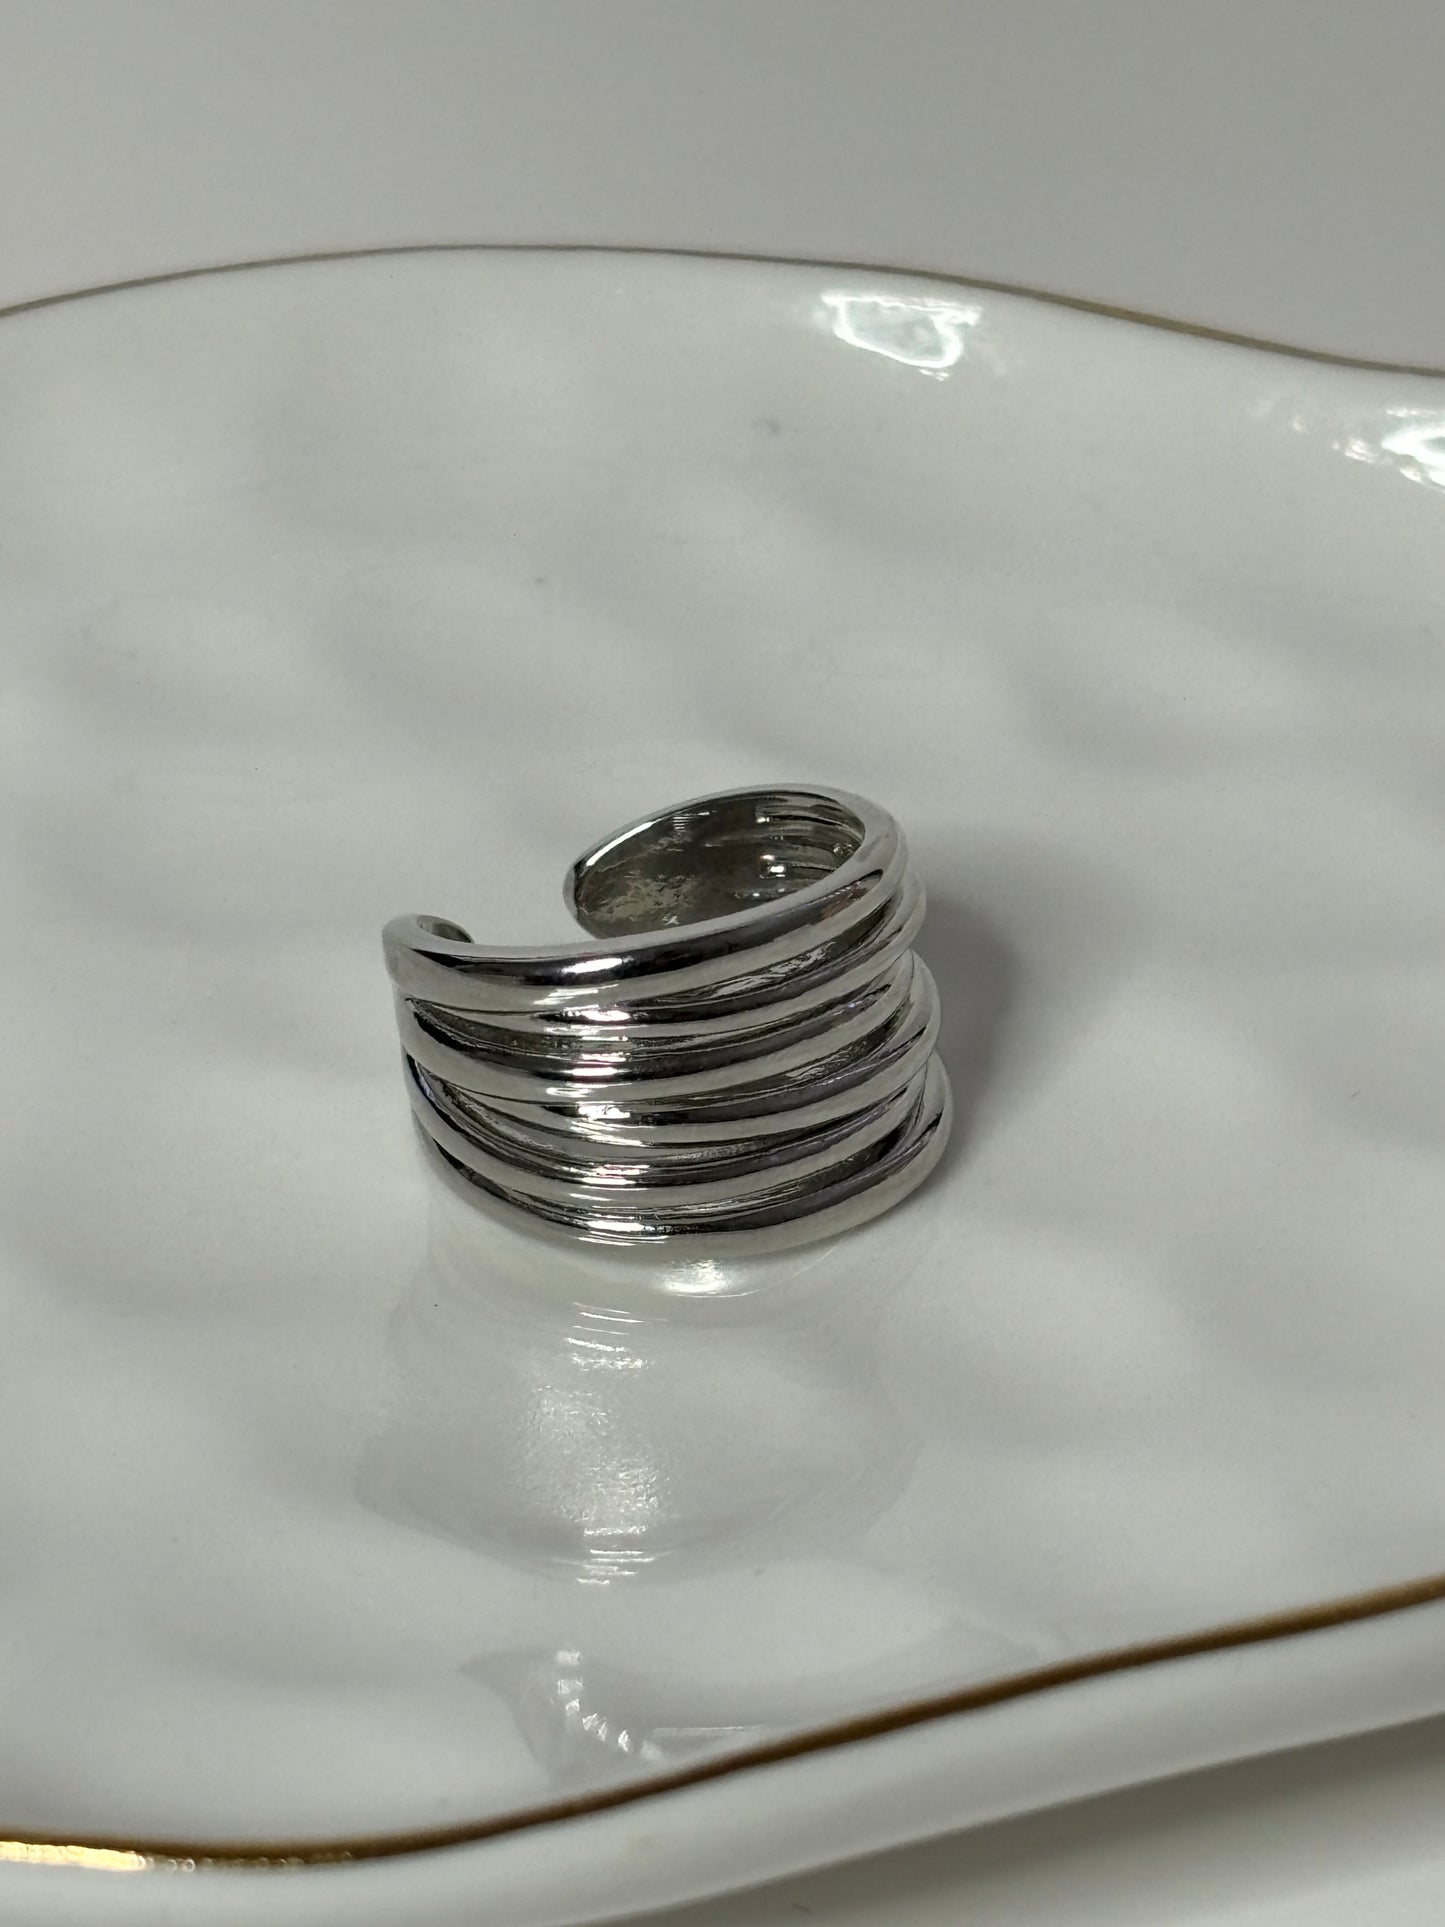 Simple Stack Ring